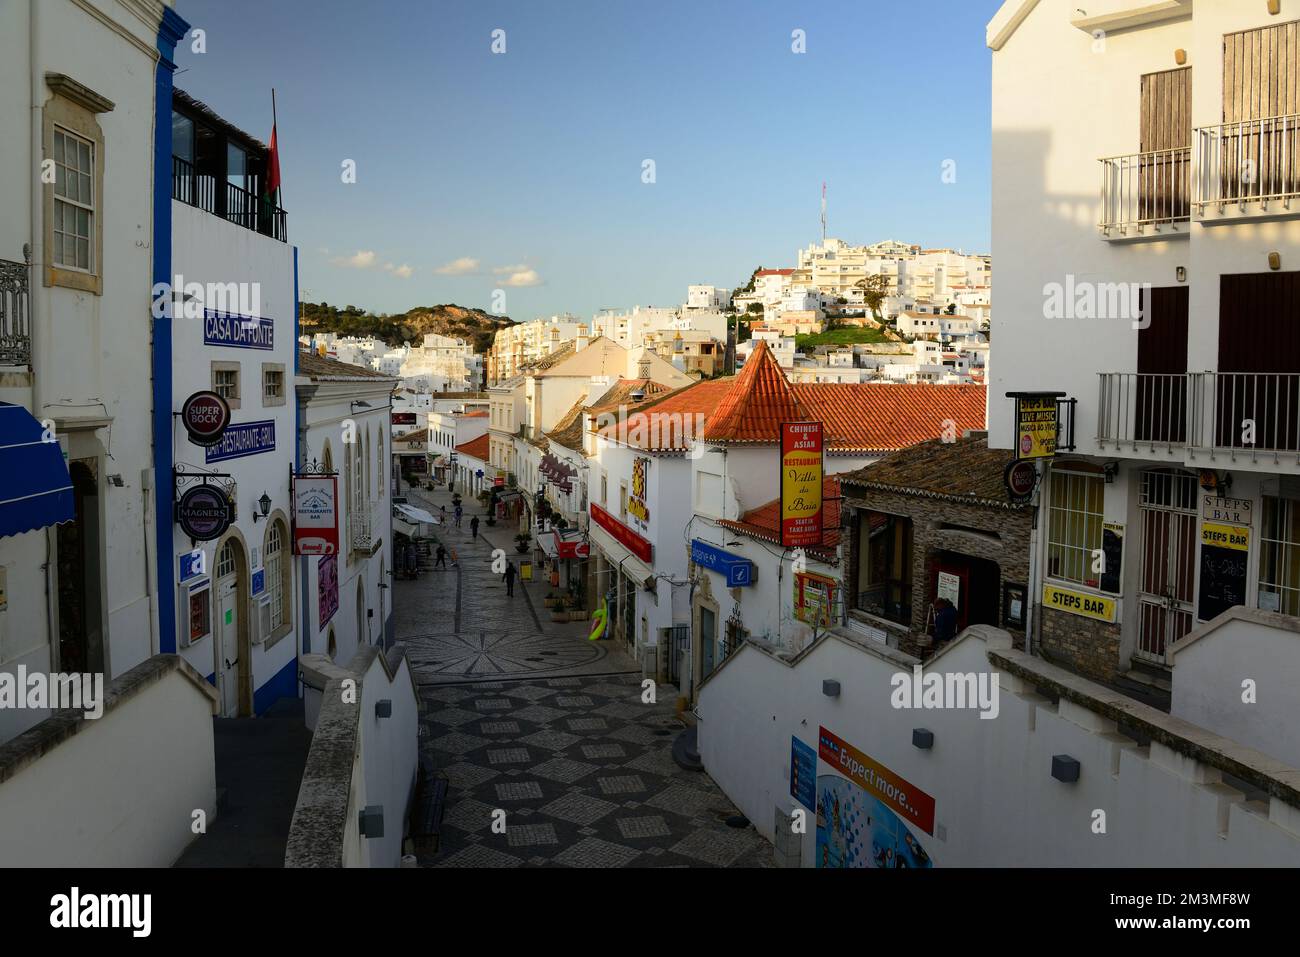 An exterior view of a precinct in the resort of Albufeira, Portugal, with residential buildings Stock Photo